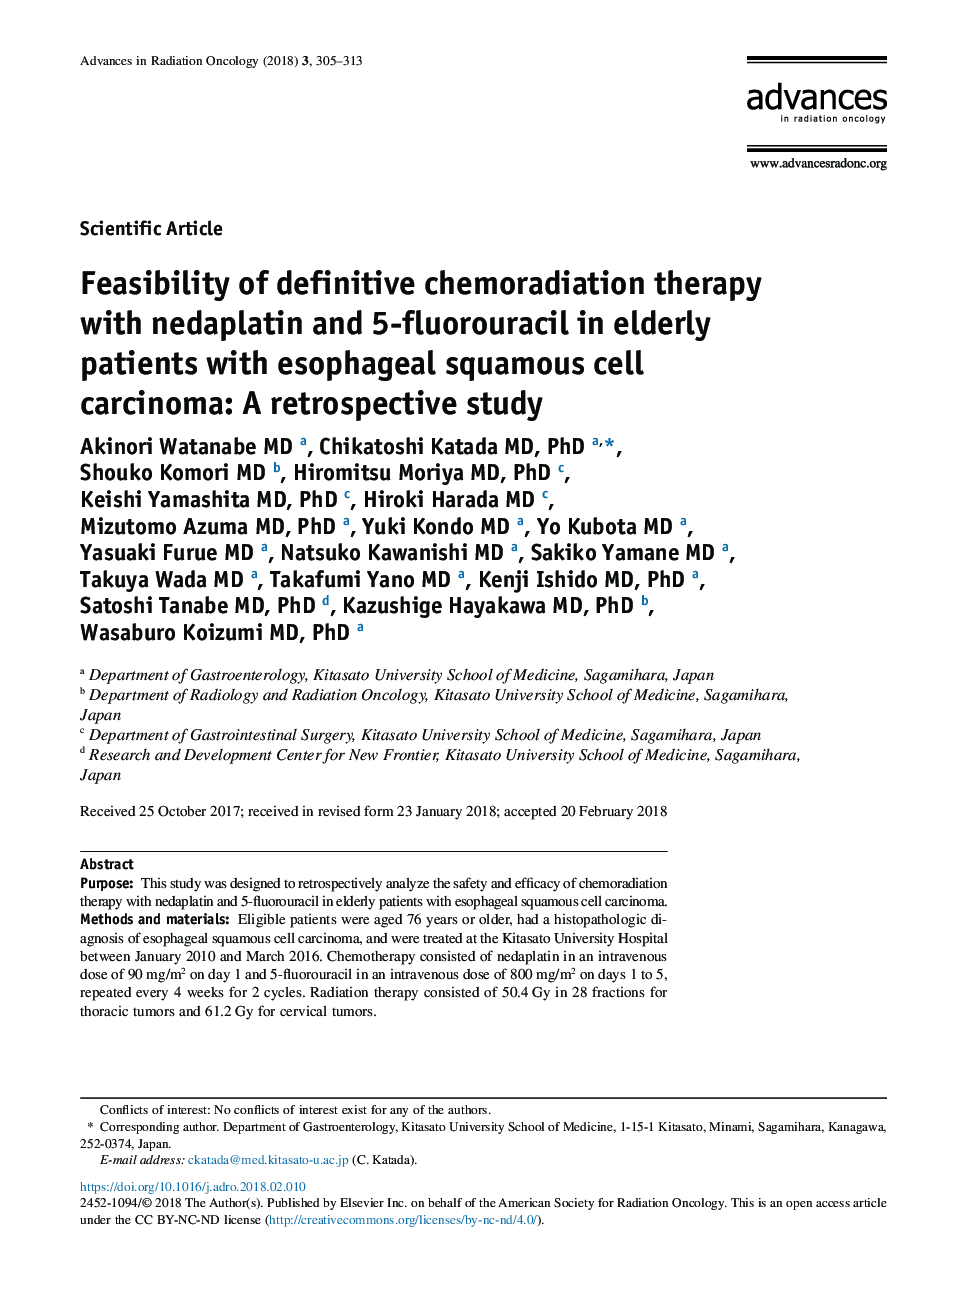 Feasibility of definitive chemoradiation therapy with nedaplatin and 5-fluorouracil in elderly patients with esophageal squamous cell carcinoma: A retrospective study